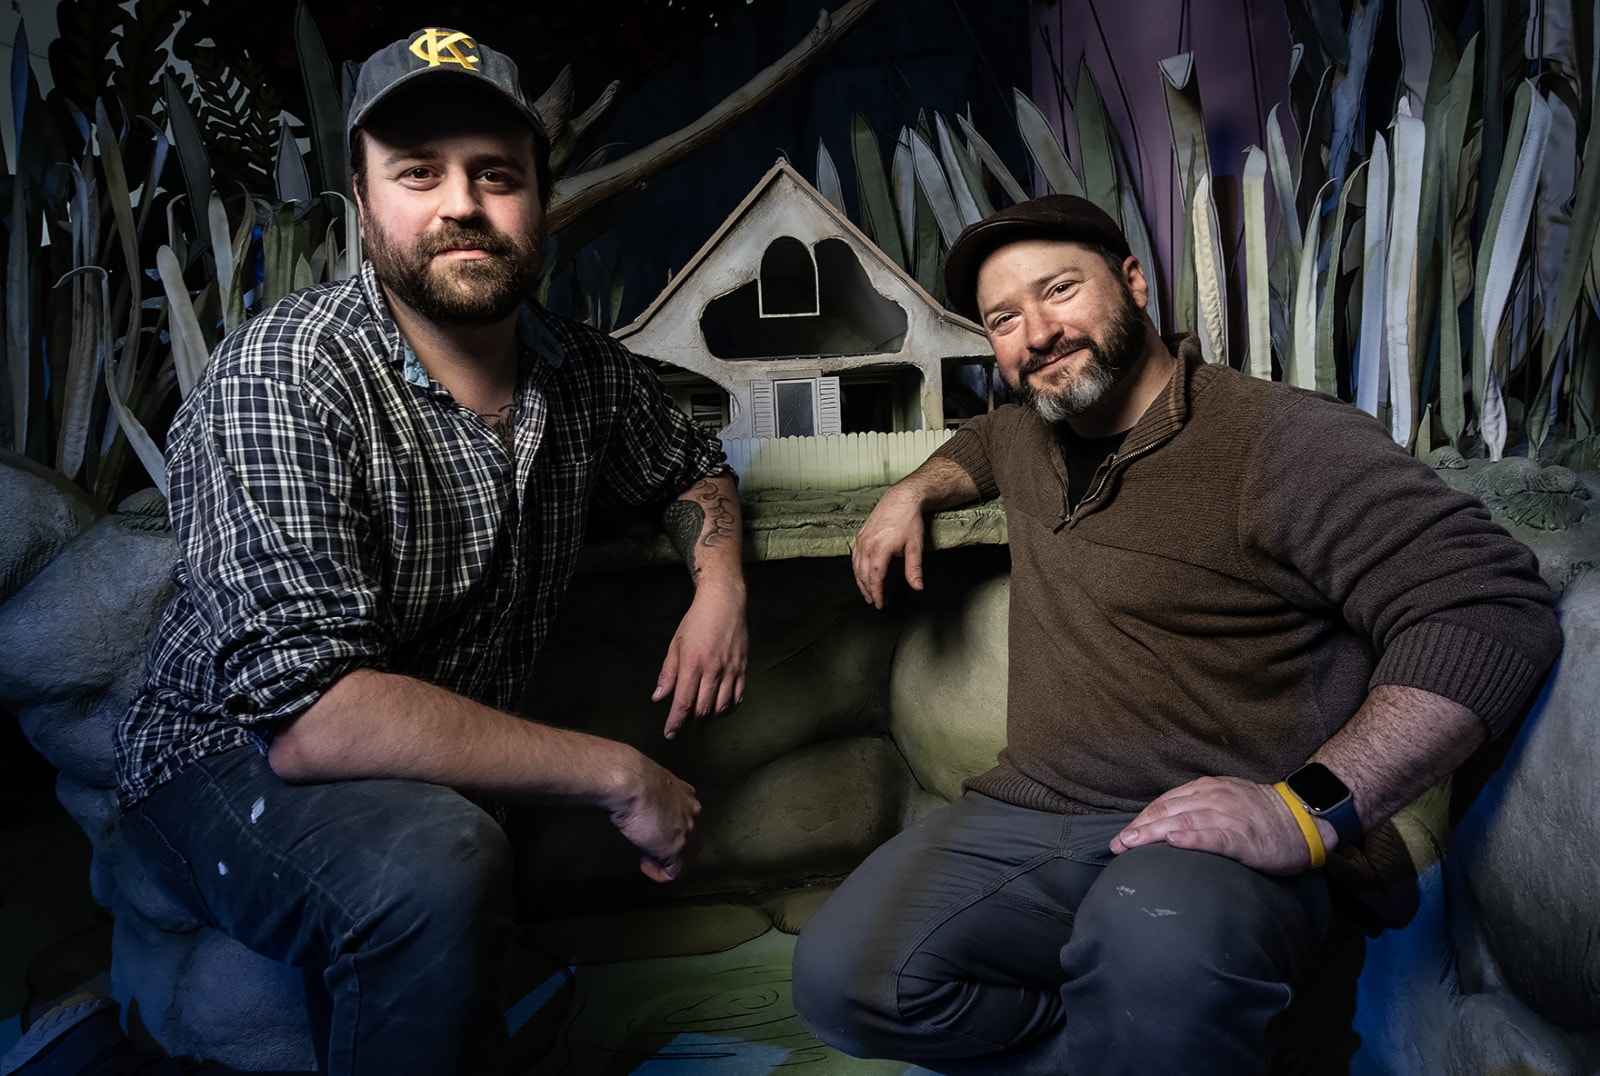 Artists and fabricators Evan Stein, left, and Grant Kelso next to Toad’s house, amidst the rocks and cattails from the "Frog and Toad" exhibit at The Rabbit Hole in North Kansas City.